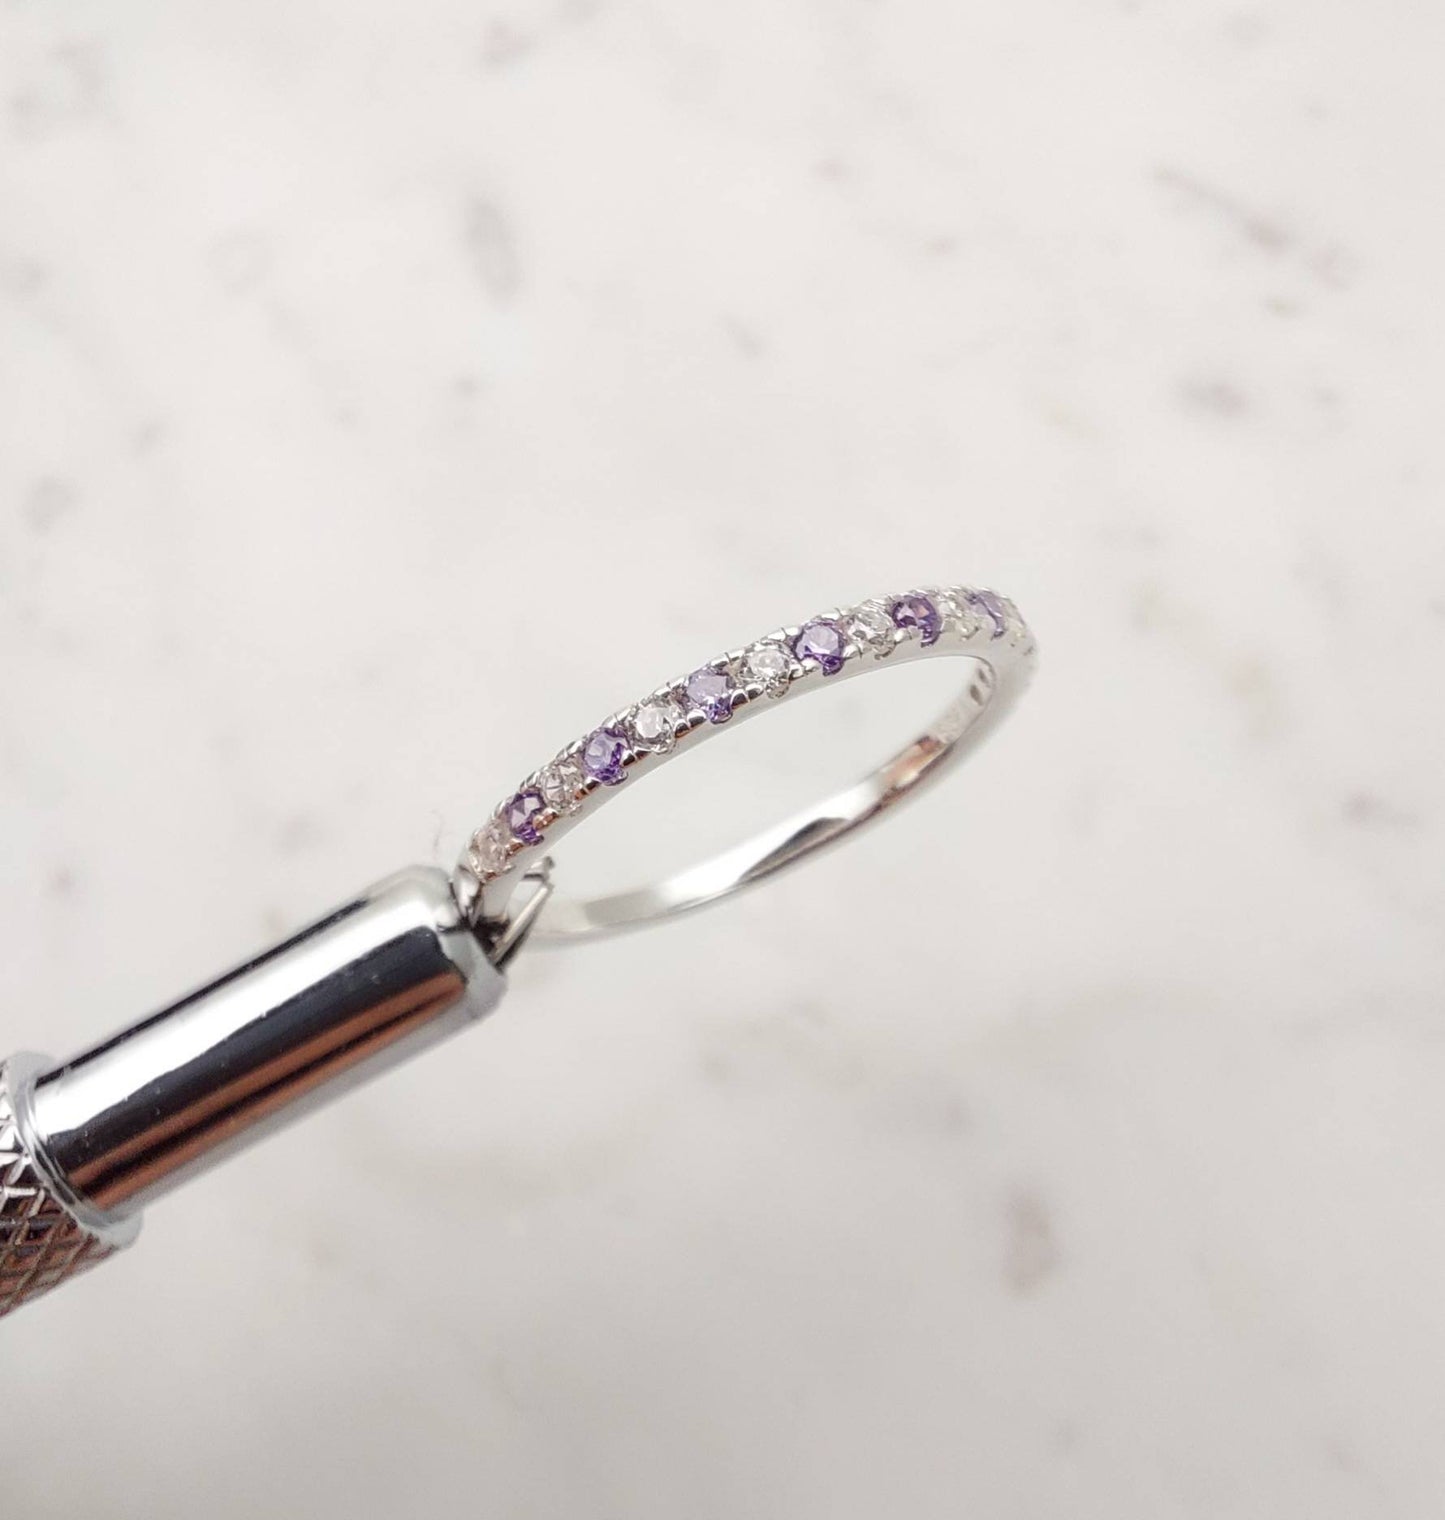 1.8mm wide Amethyst and diamond Half Eternity ring - stacking ring - wedding band in white gold or Silver